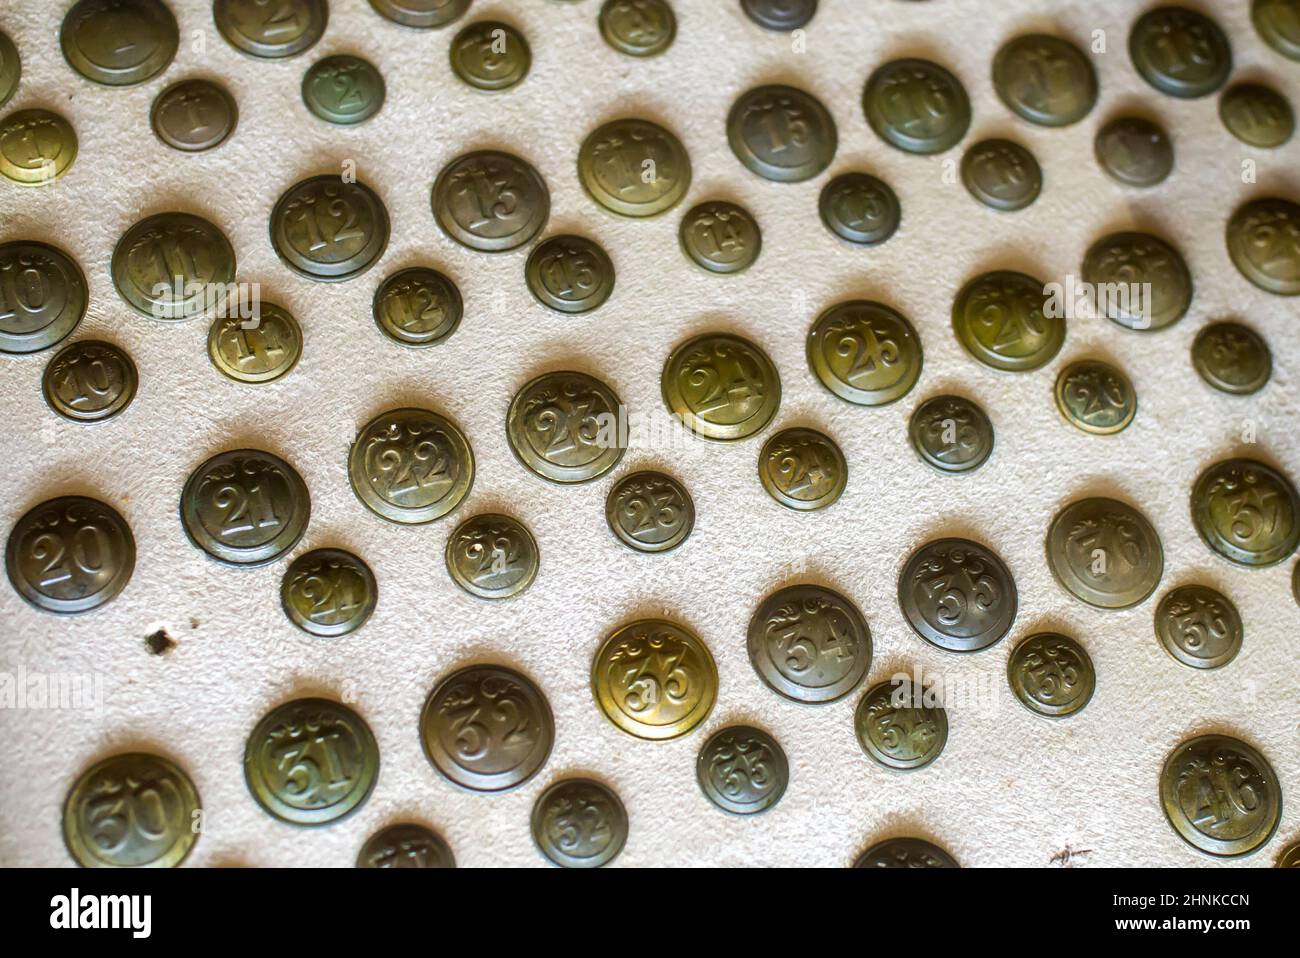 Buttons on the uniforms of privates of the line infantry during the Crimean War Stock Photo